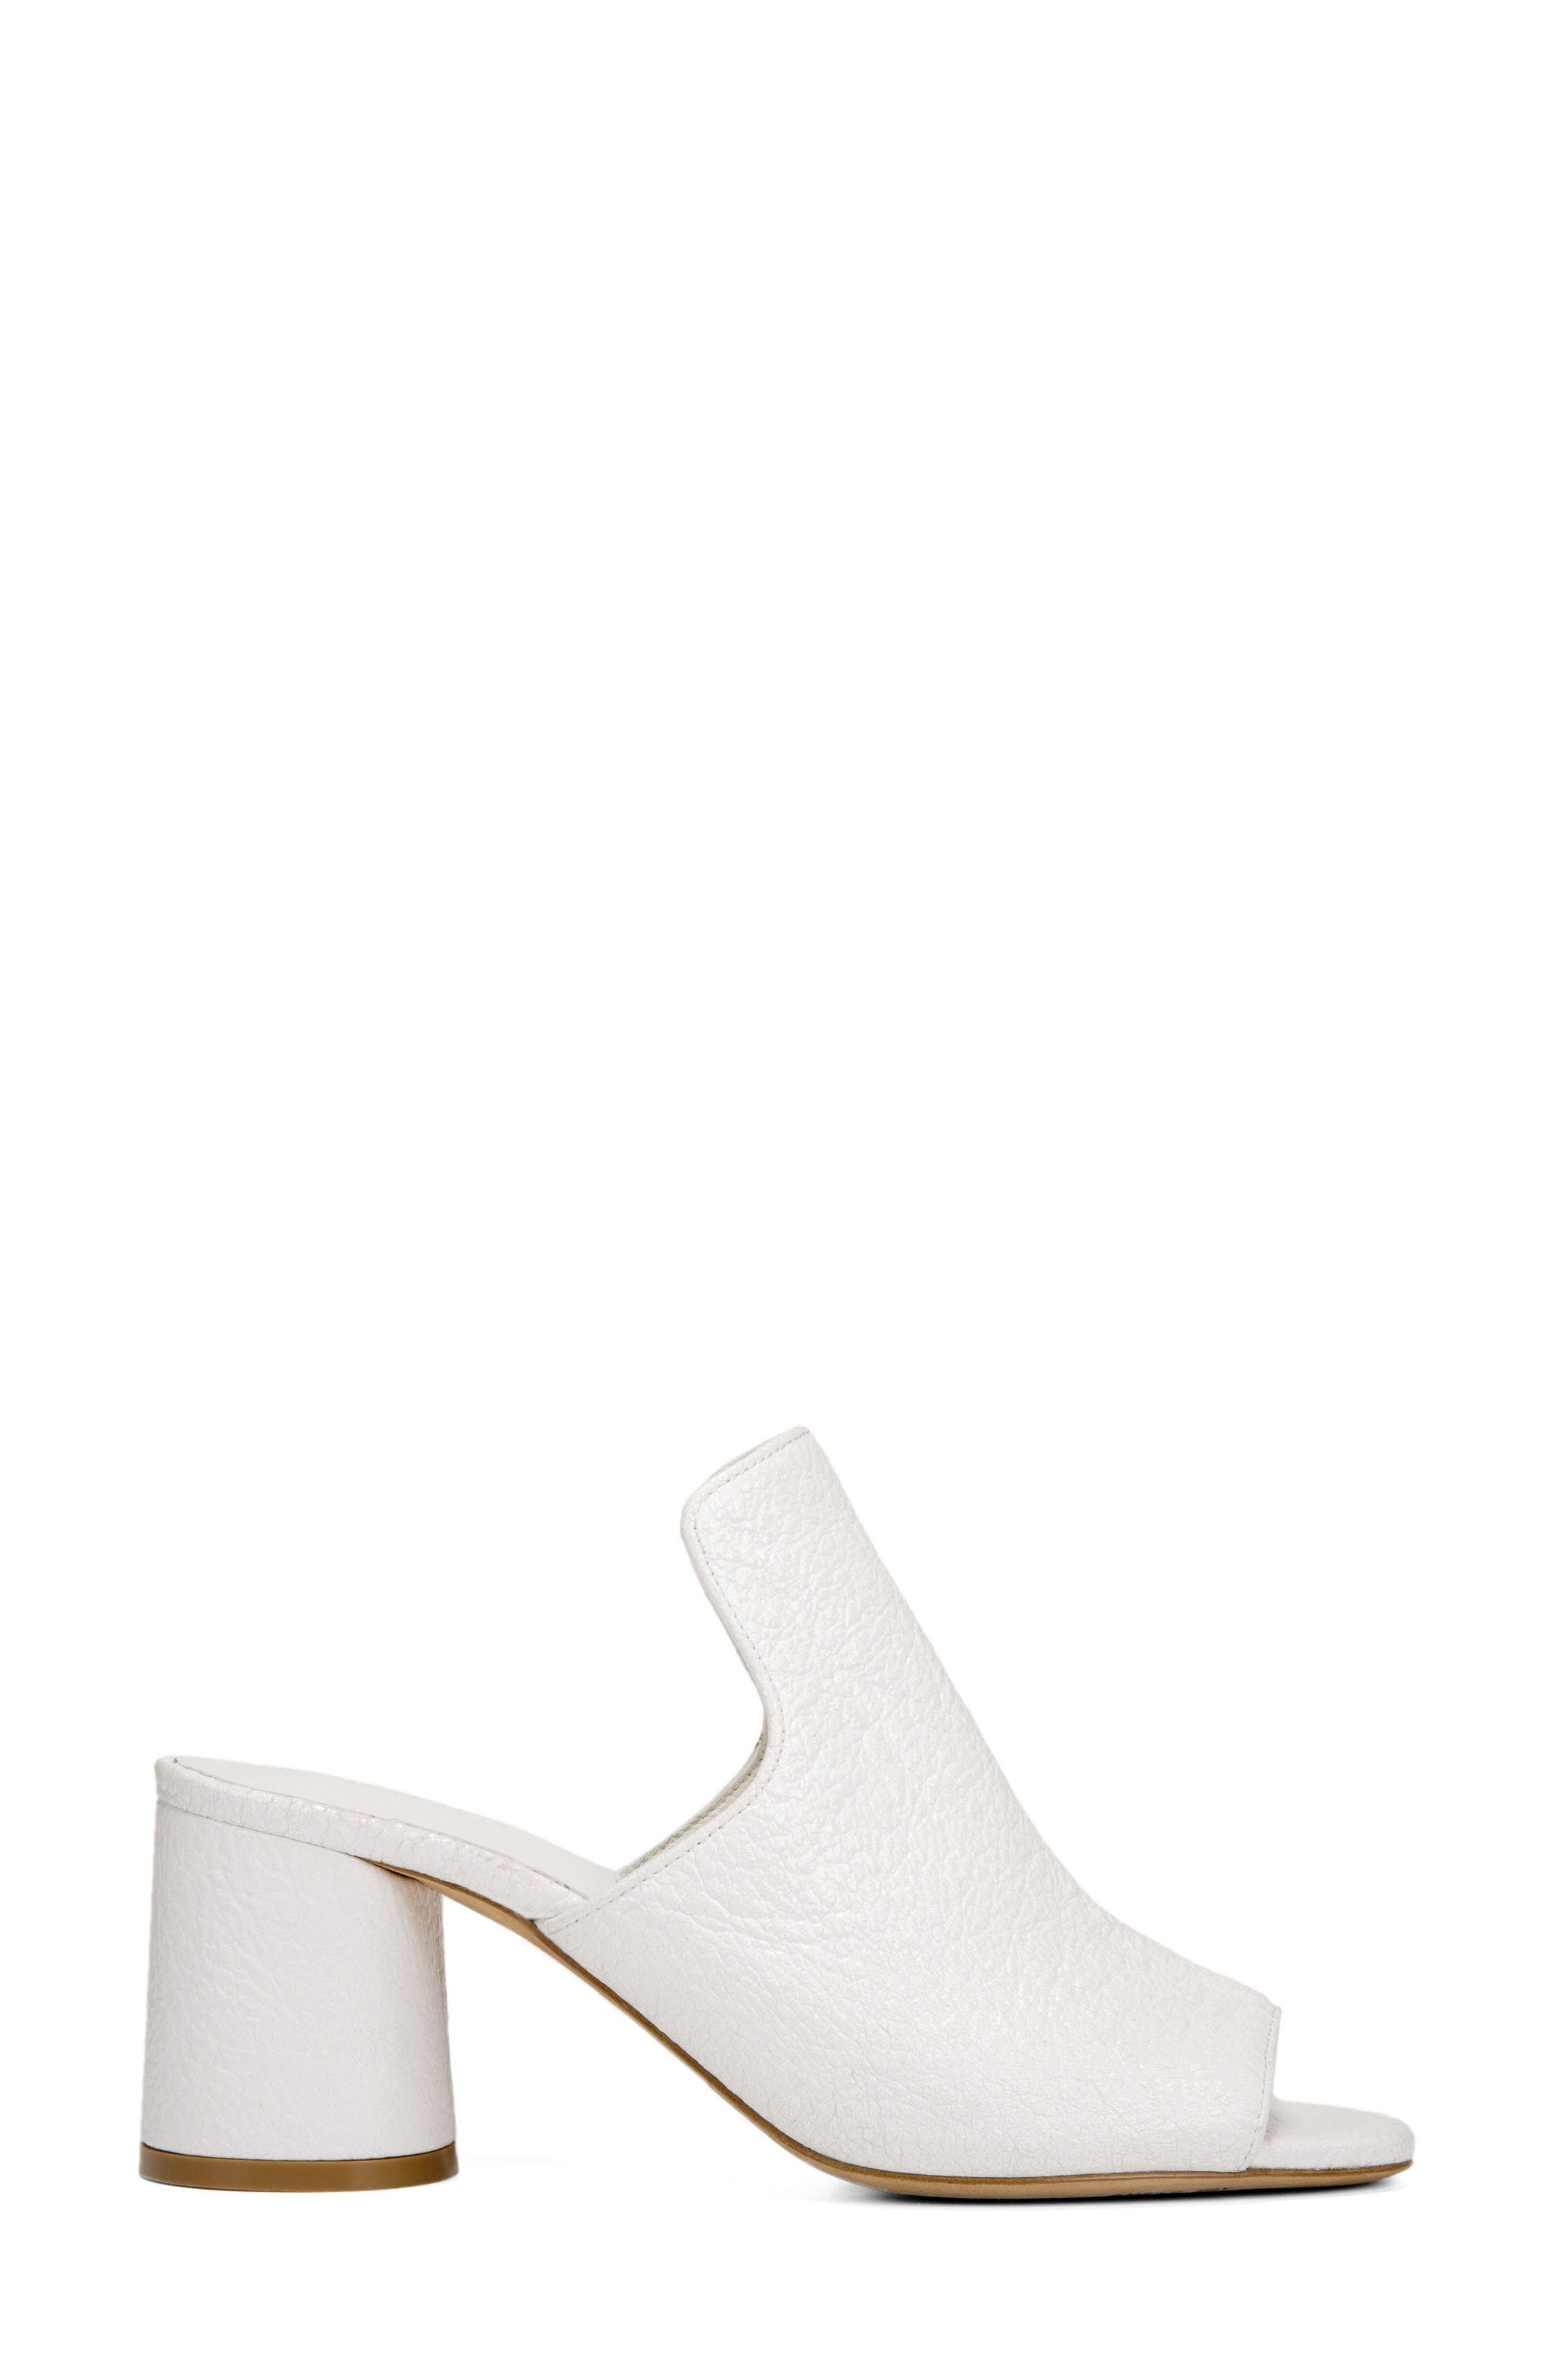 vince tanay leather mule